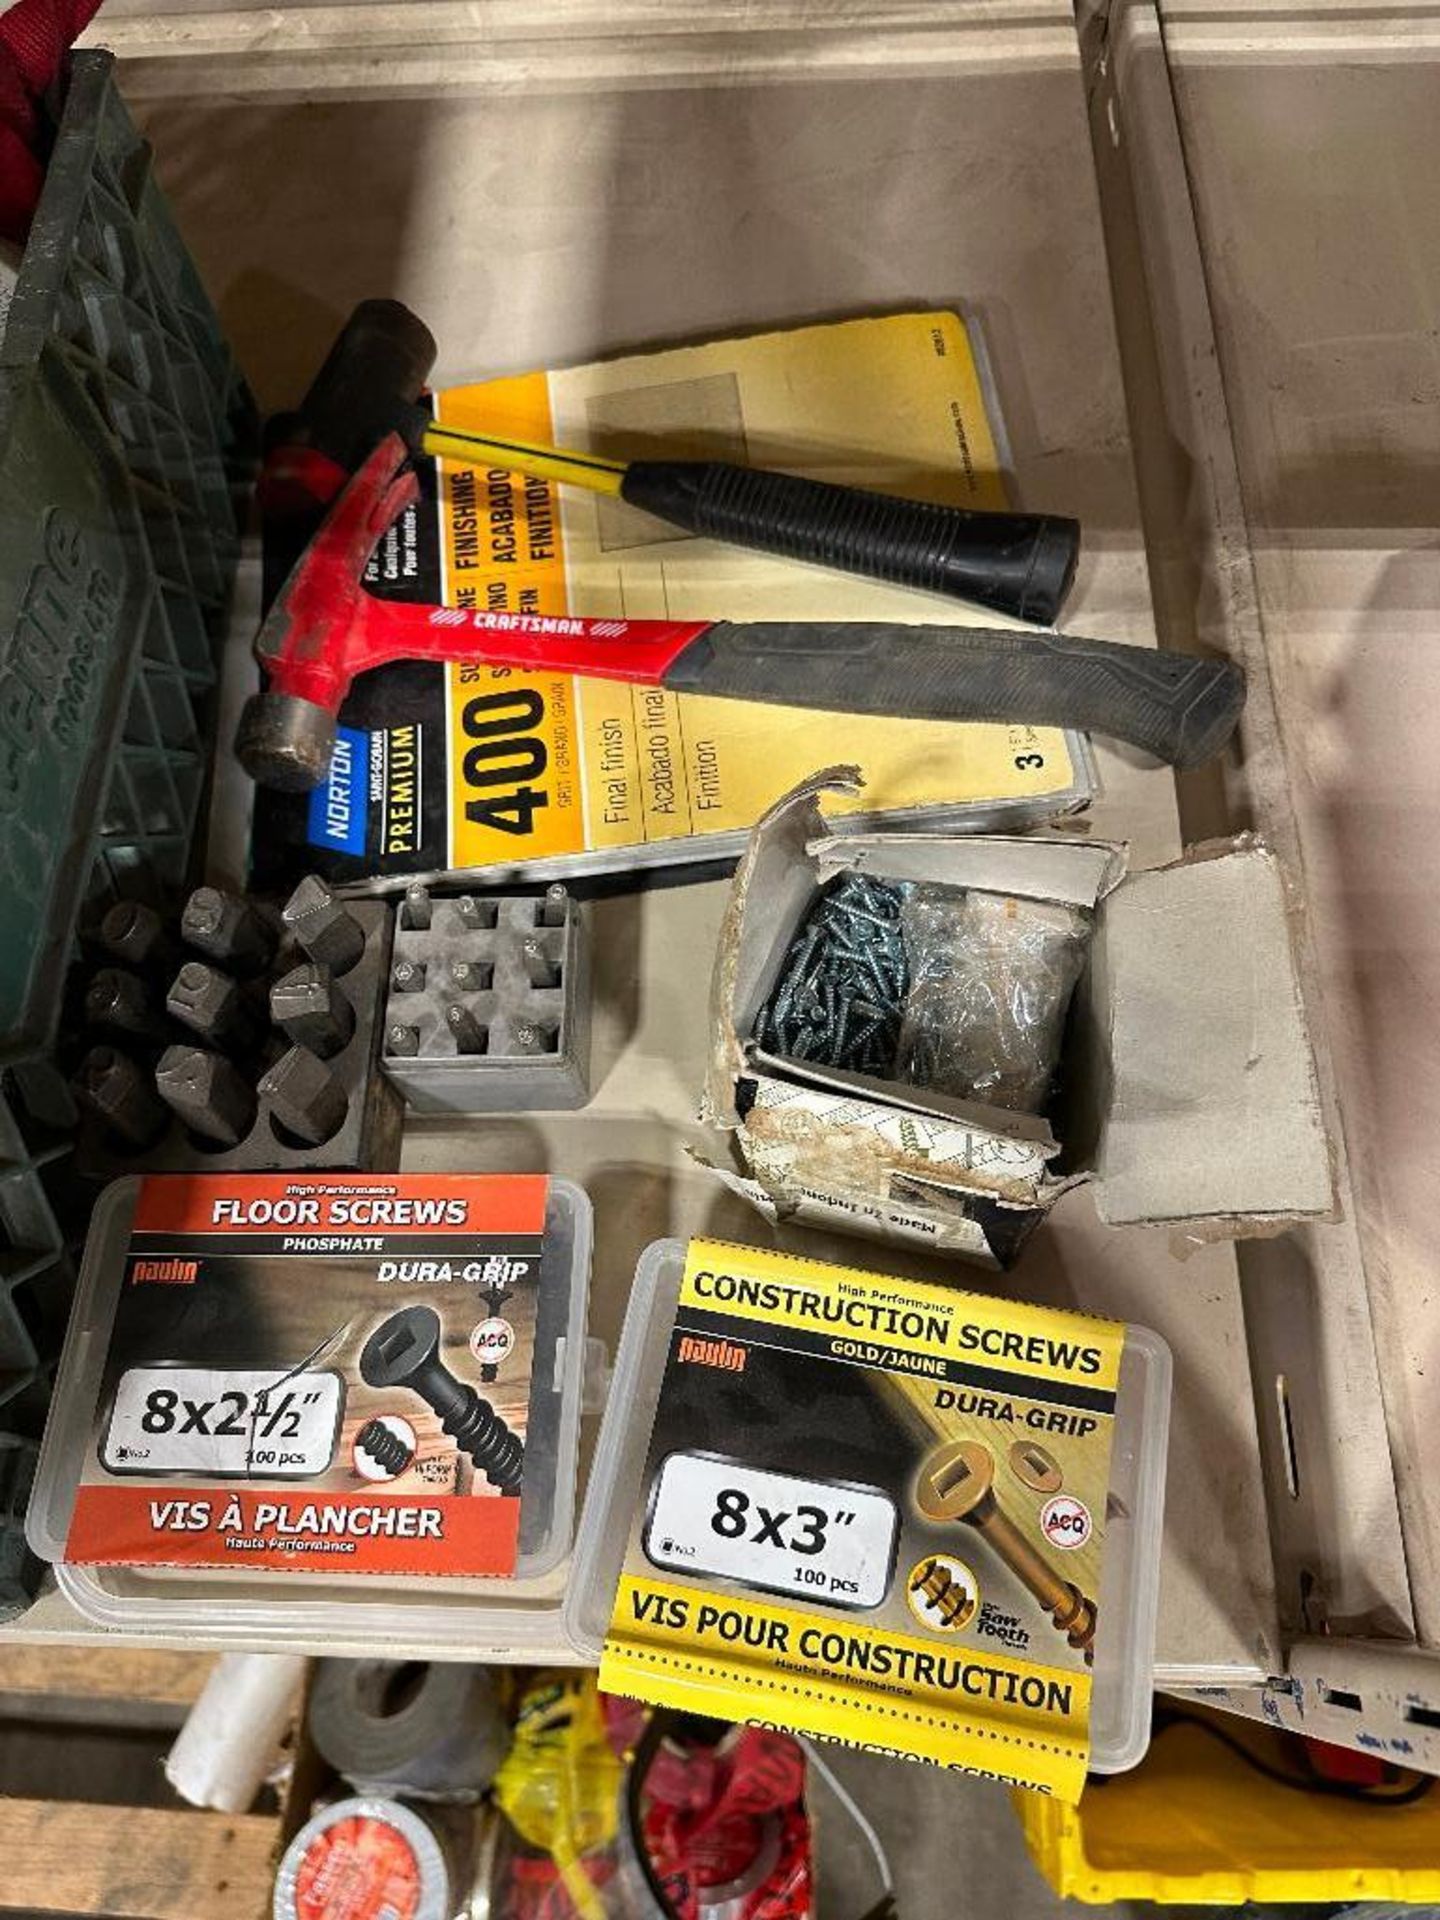 Lot of Asst. Fasteners, Hammers, Wrenches, Stamps, Sand Paper, etc. - Image 2 of 3